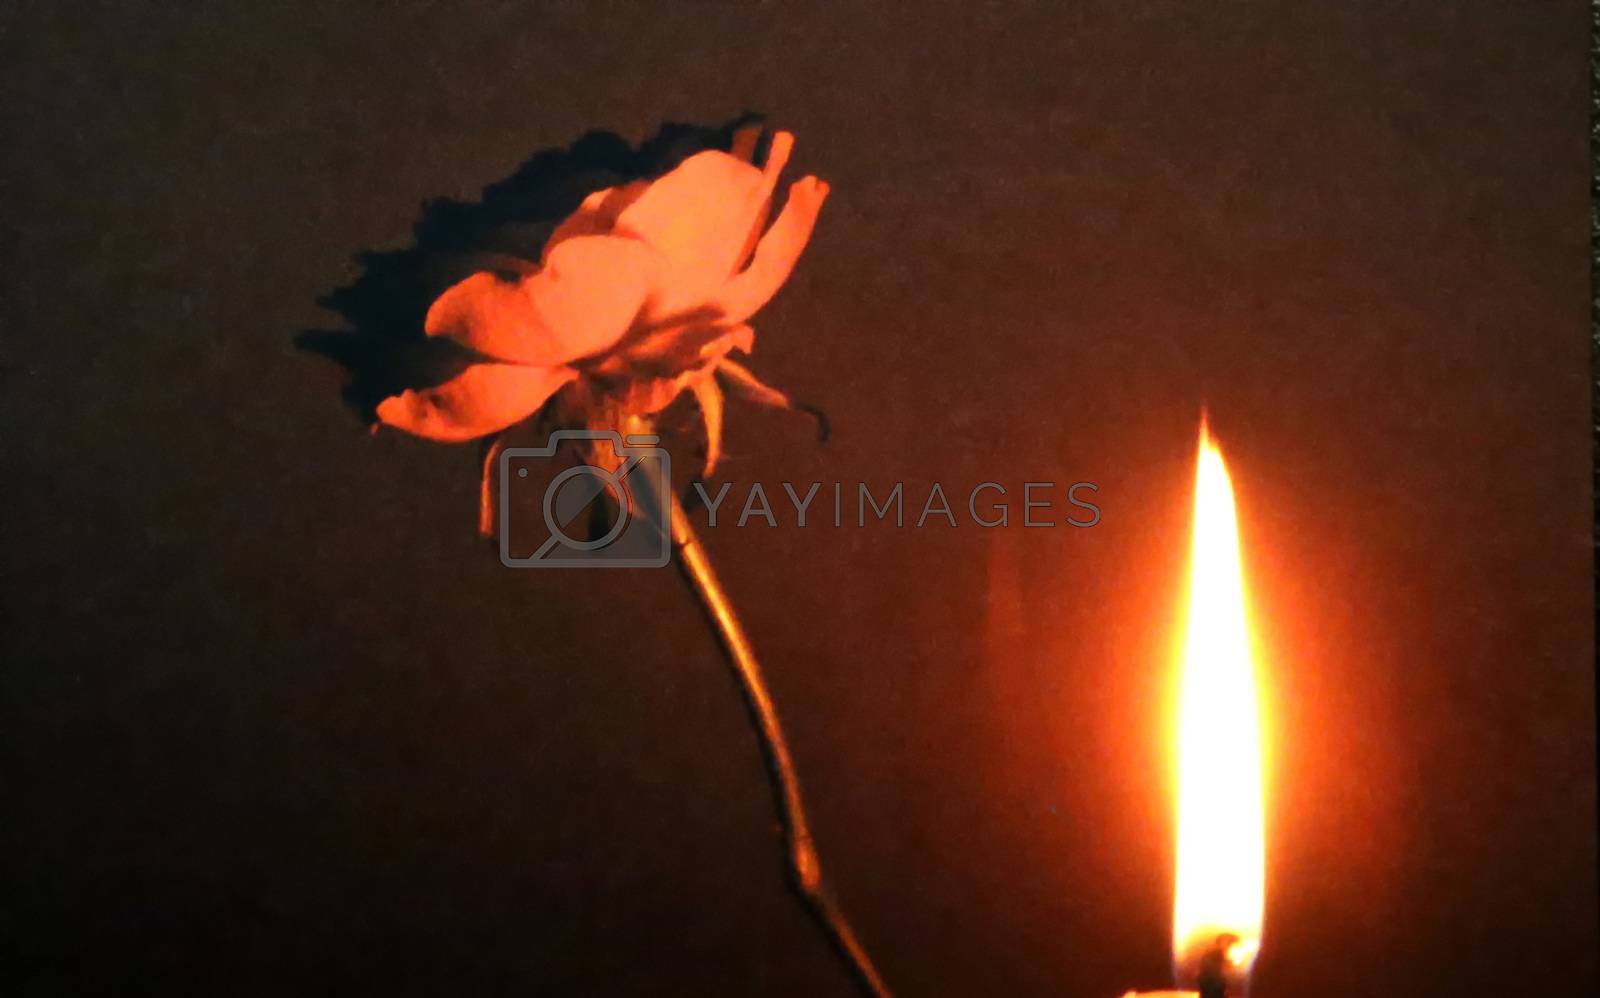 Royalty free image of candlelight with red rose by Jochen